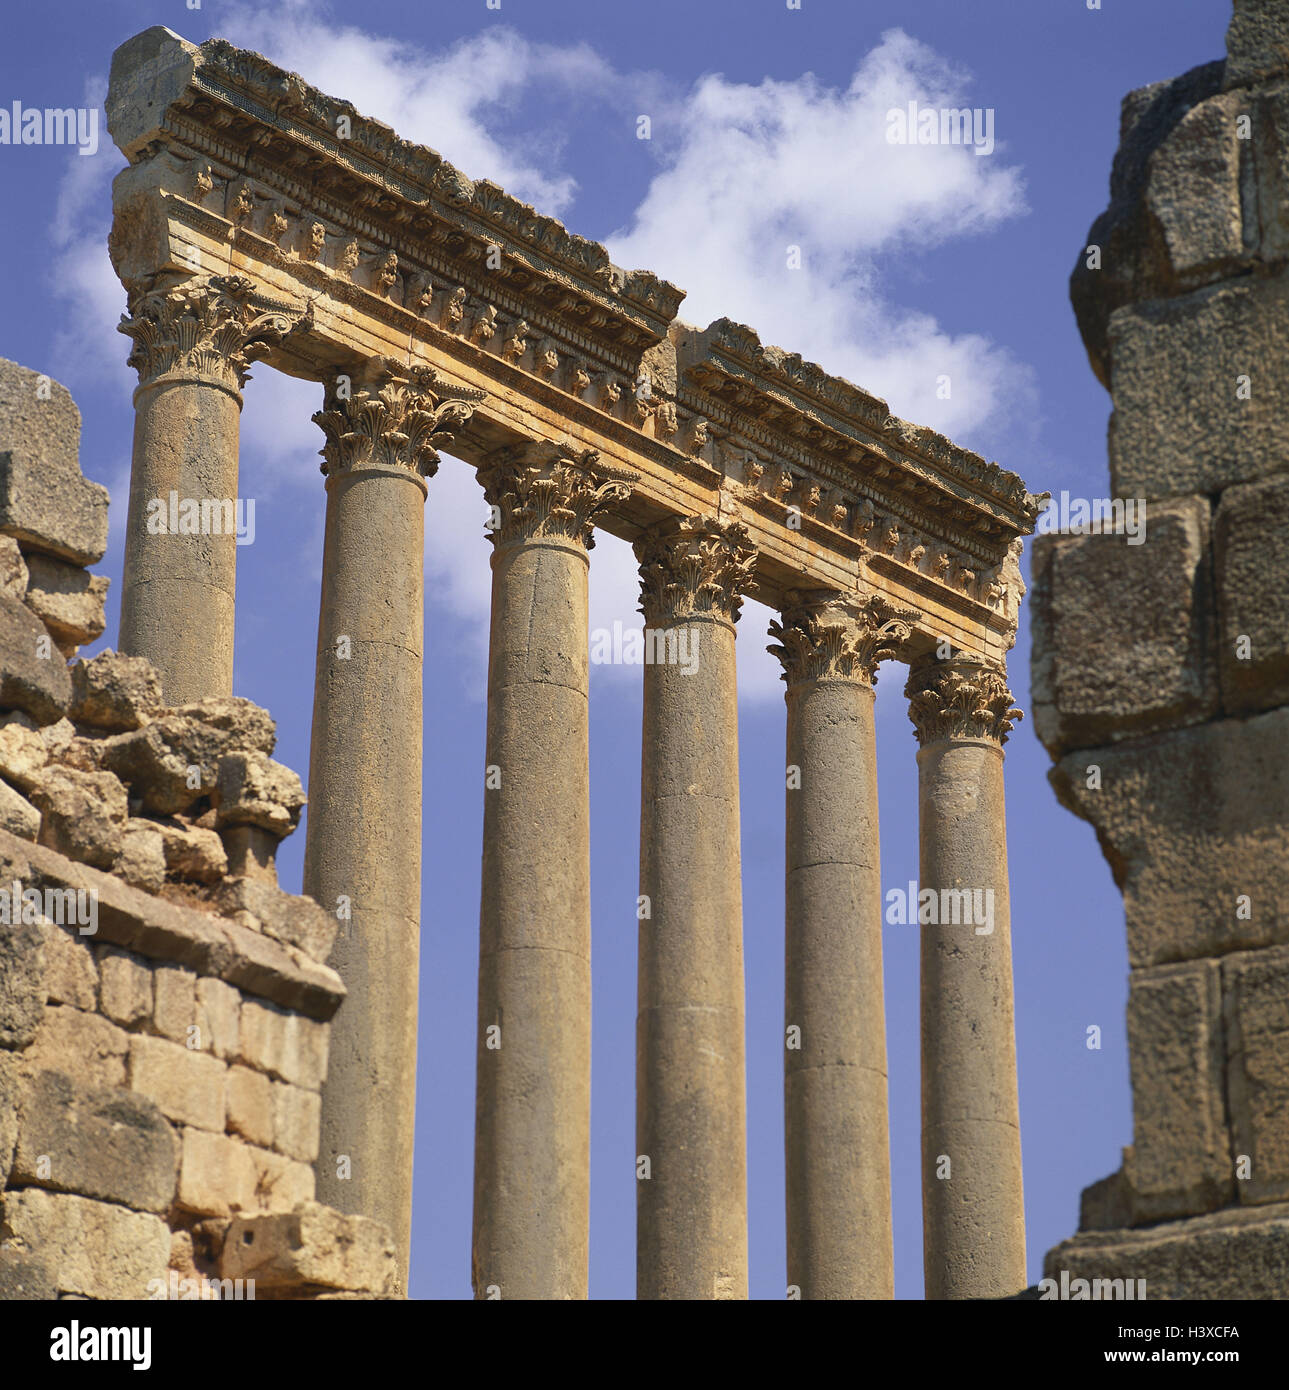 Lebanon, Baalbek, ruin site, Jupiter temple, pillars, the Middle East, front East, the Near East, Balbek, temple area, ruins, 1 - 3 cent., ruin town, ruin, remains, colonnades, defensive wall, relief, lion's head, art, culture, place of interest, UNESCO-world cultural heritage, Stock Photo